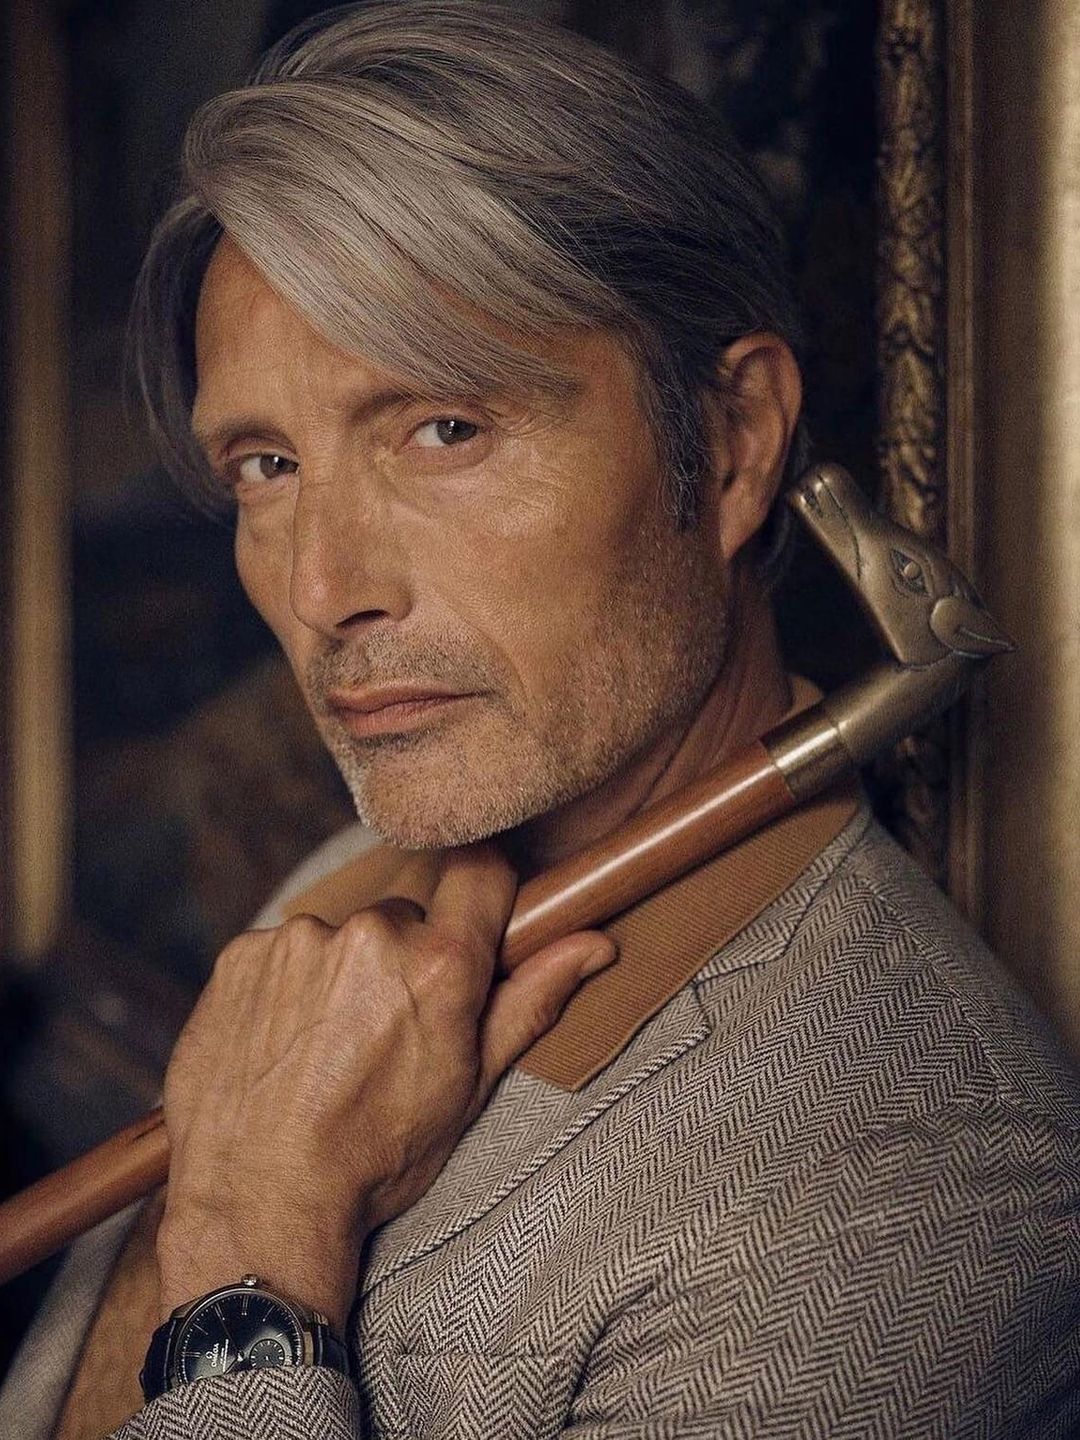 Mads Mikkelsen who are his parents